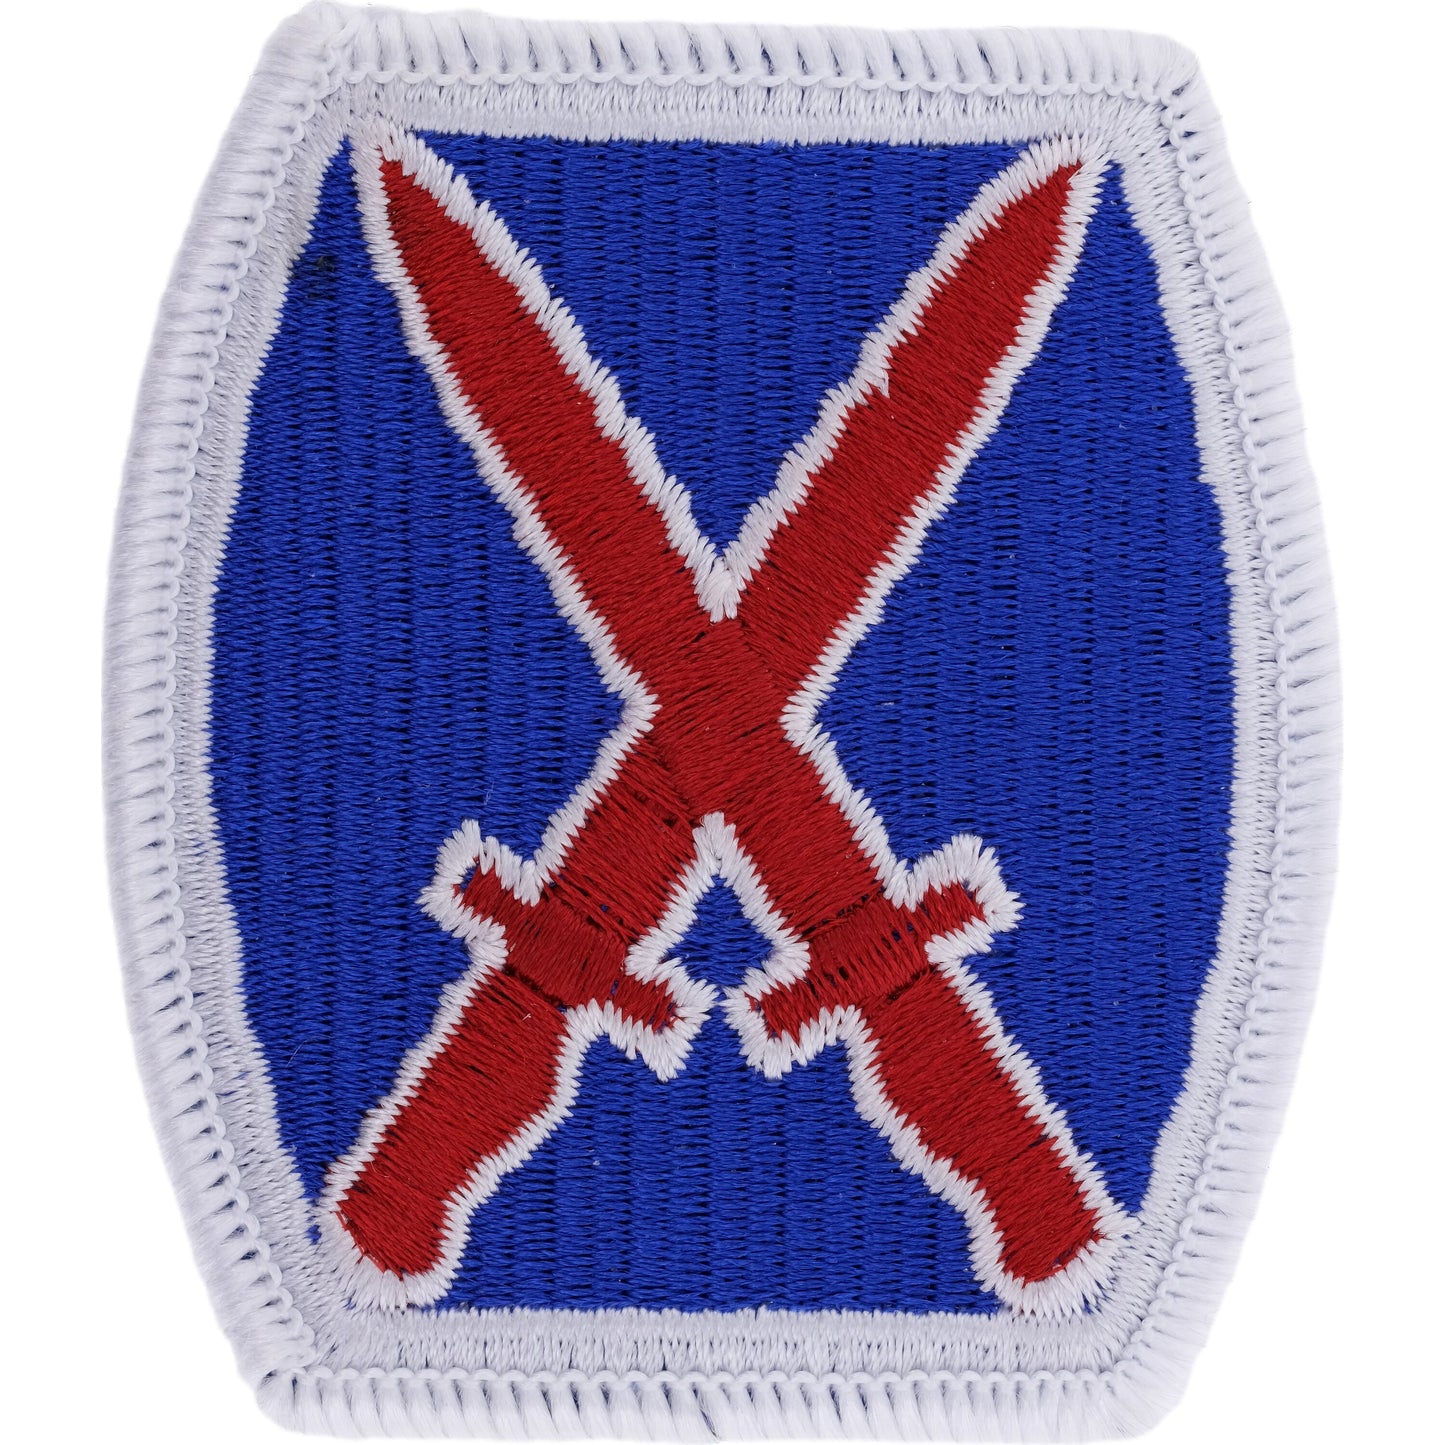 U.S Army 10th Mountain Division Class A Patch 2"